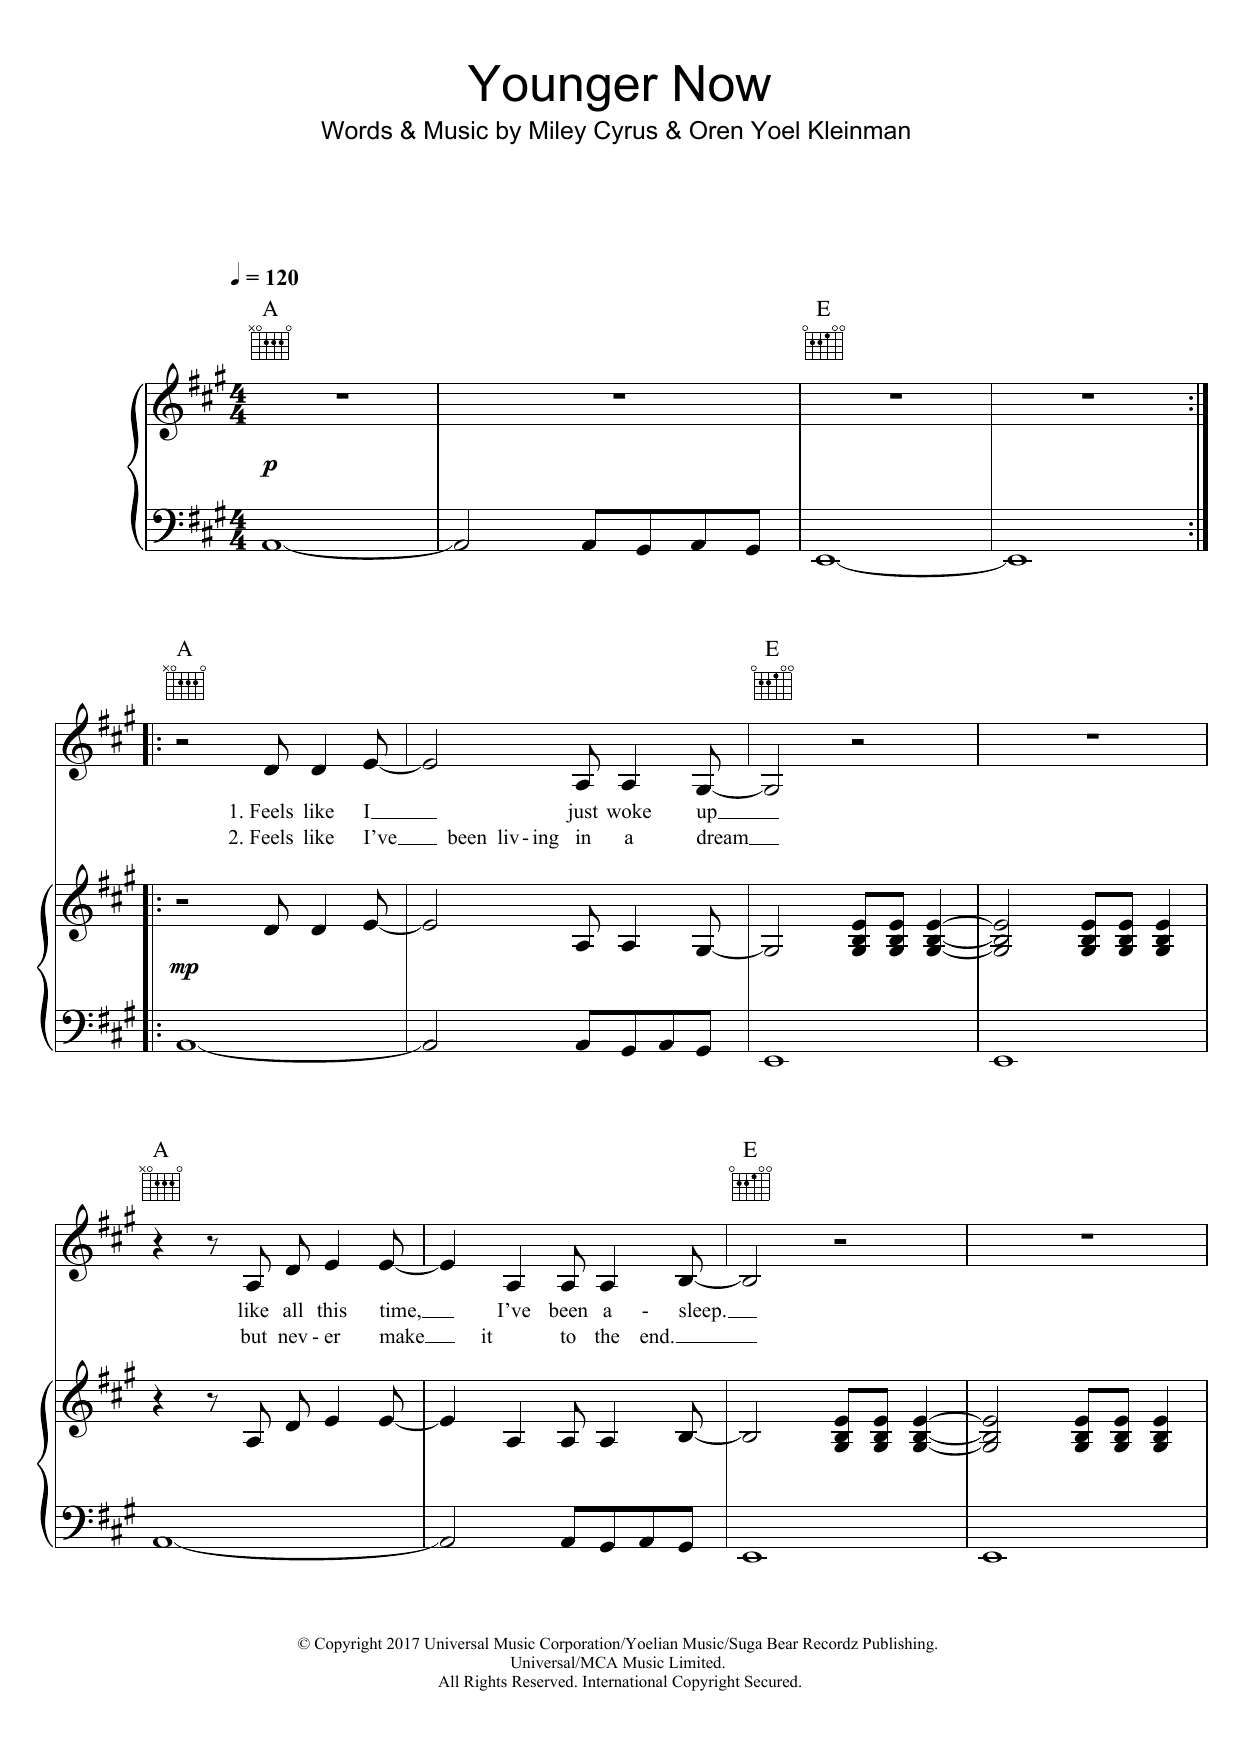 Download Miley Cyrus Younger Now Sheet Music